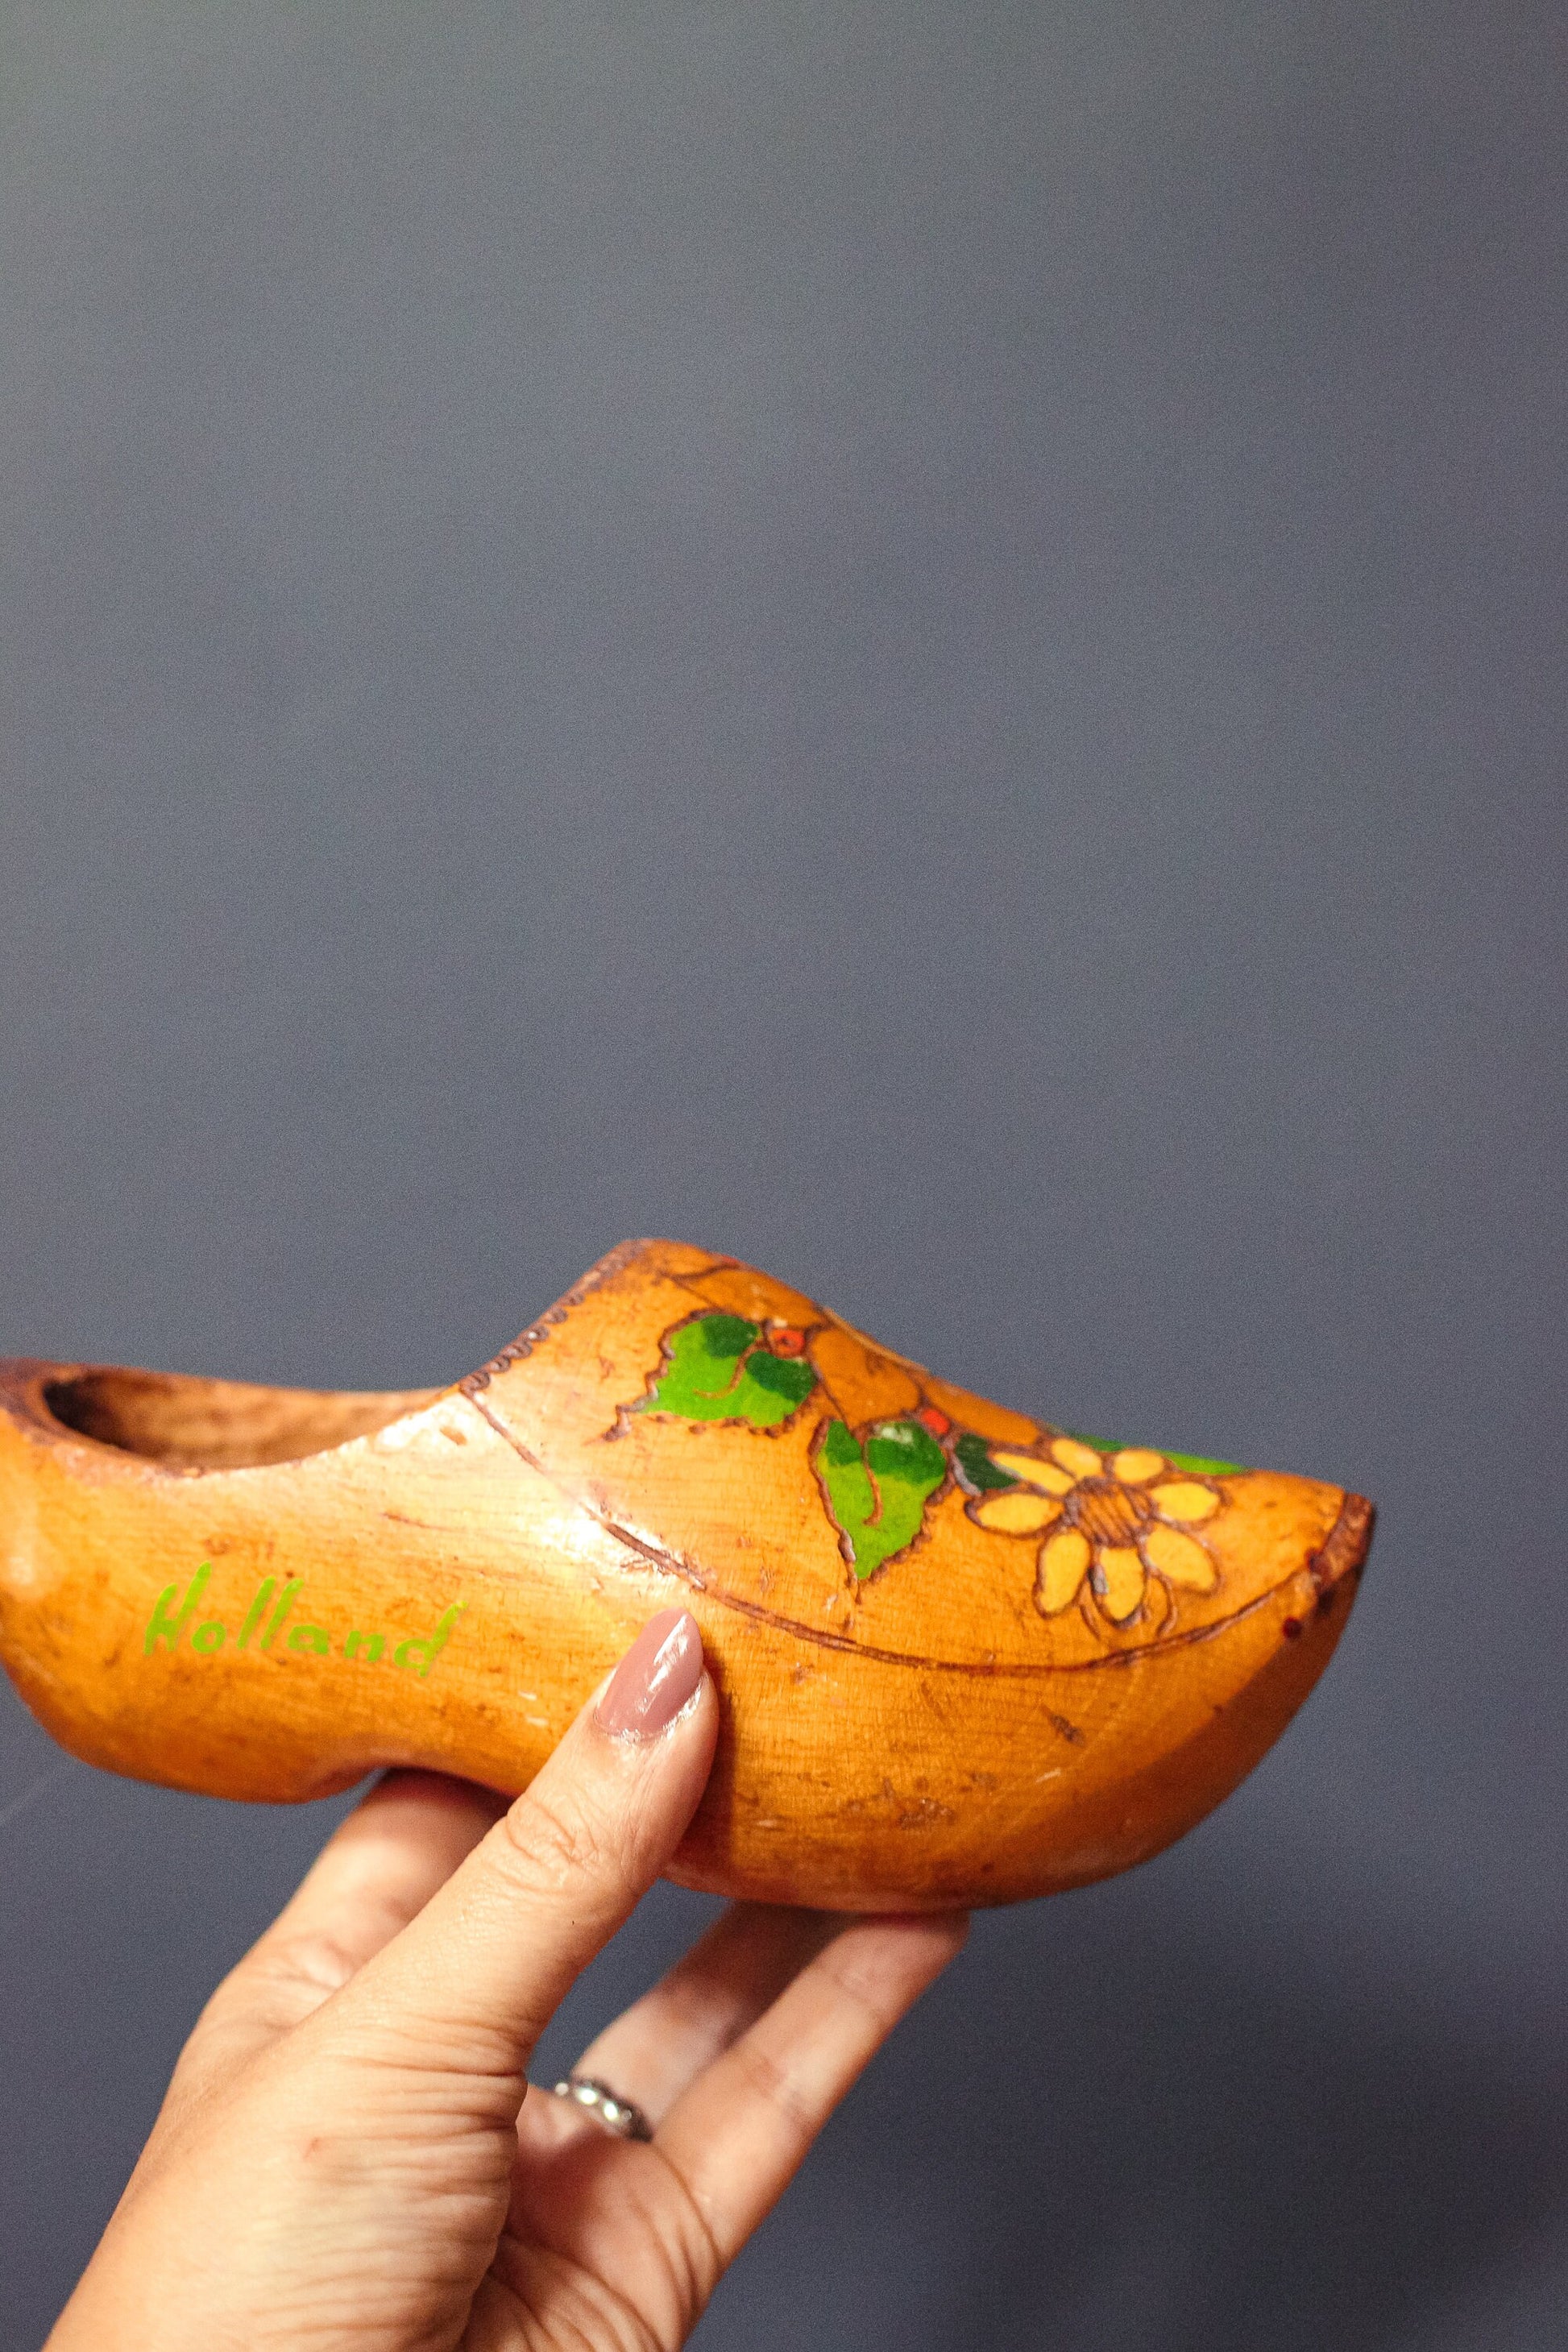 Vintage Sunflower Carved/Painted Wooden Clogs from Holland set of 2 - Pair of Dutch Sunflower Painted Wood Clogs